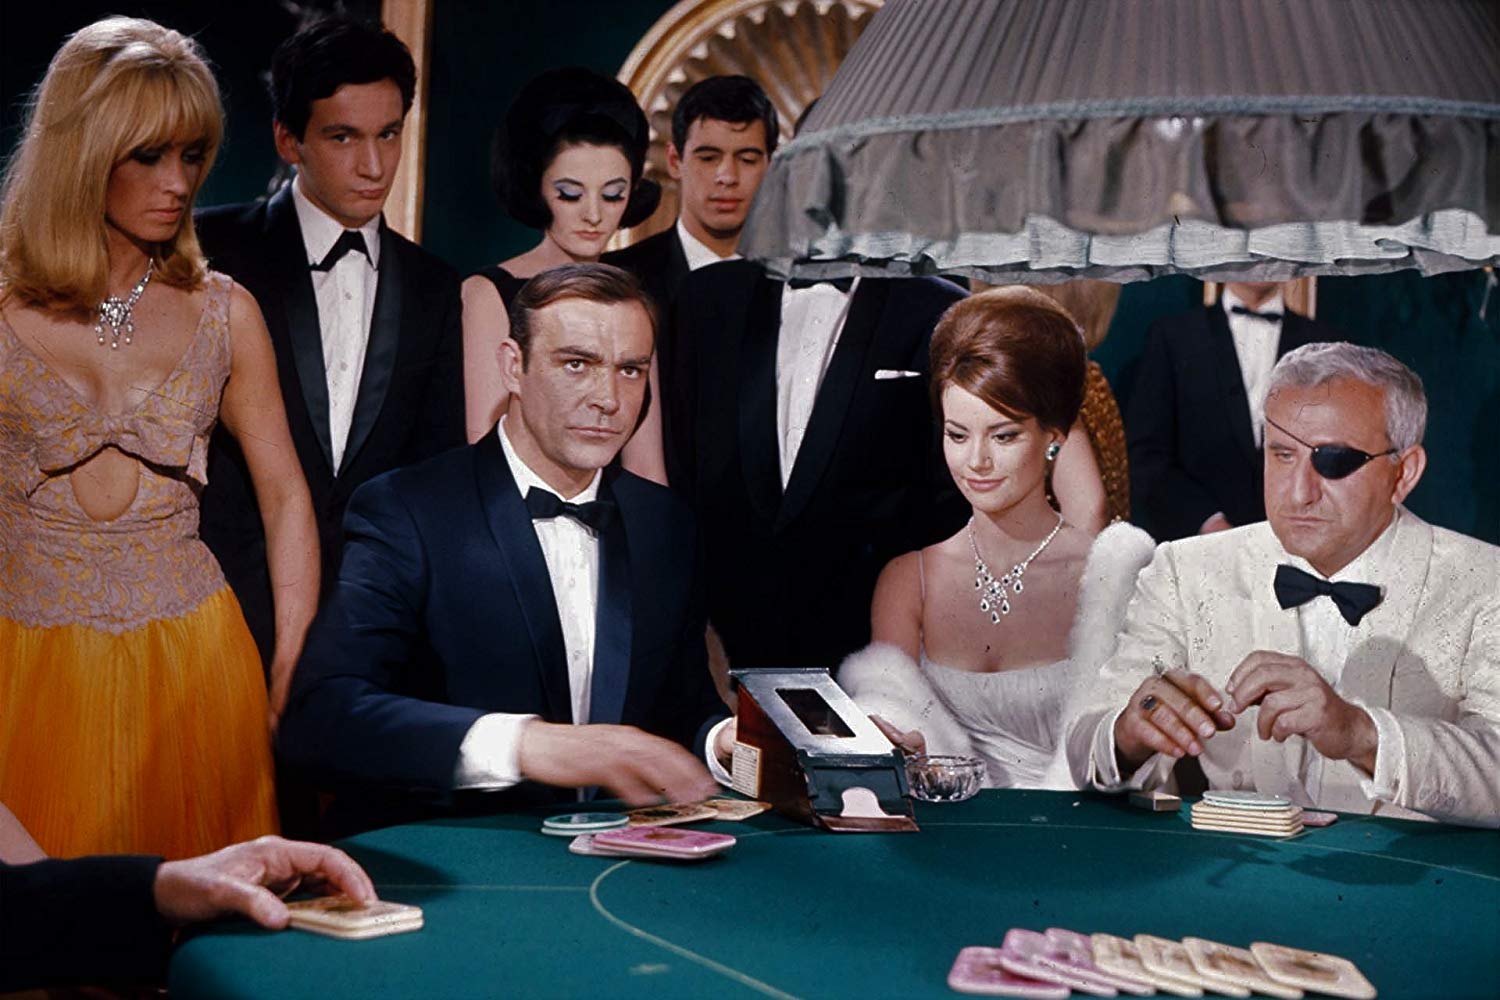 (l to r) James Bond (Sean Connery) sits down at the casino table alongside Domino (Claudine Auger) and Emilio Largo (Adolfo Celi) in Thunderball (1965)